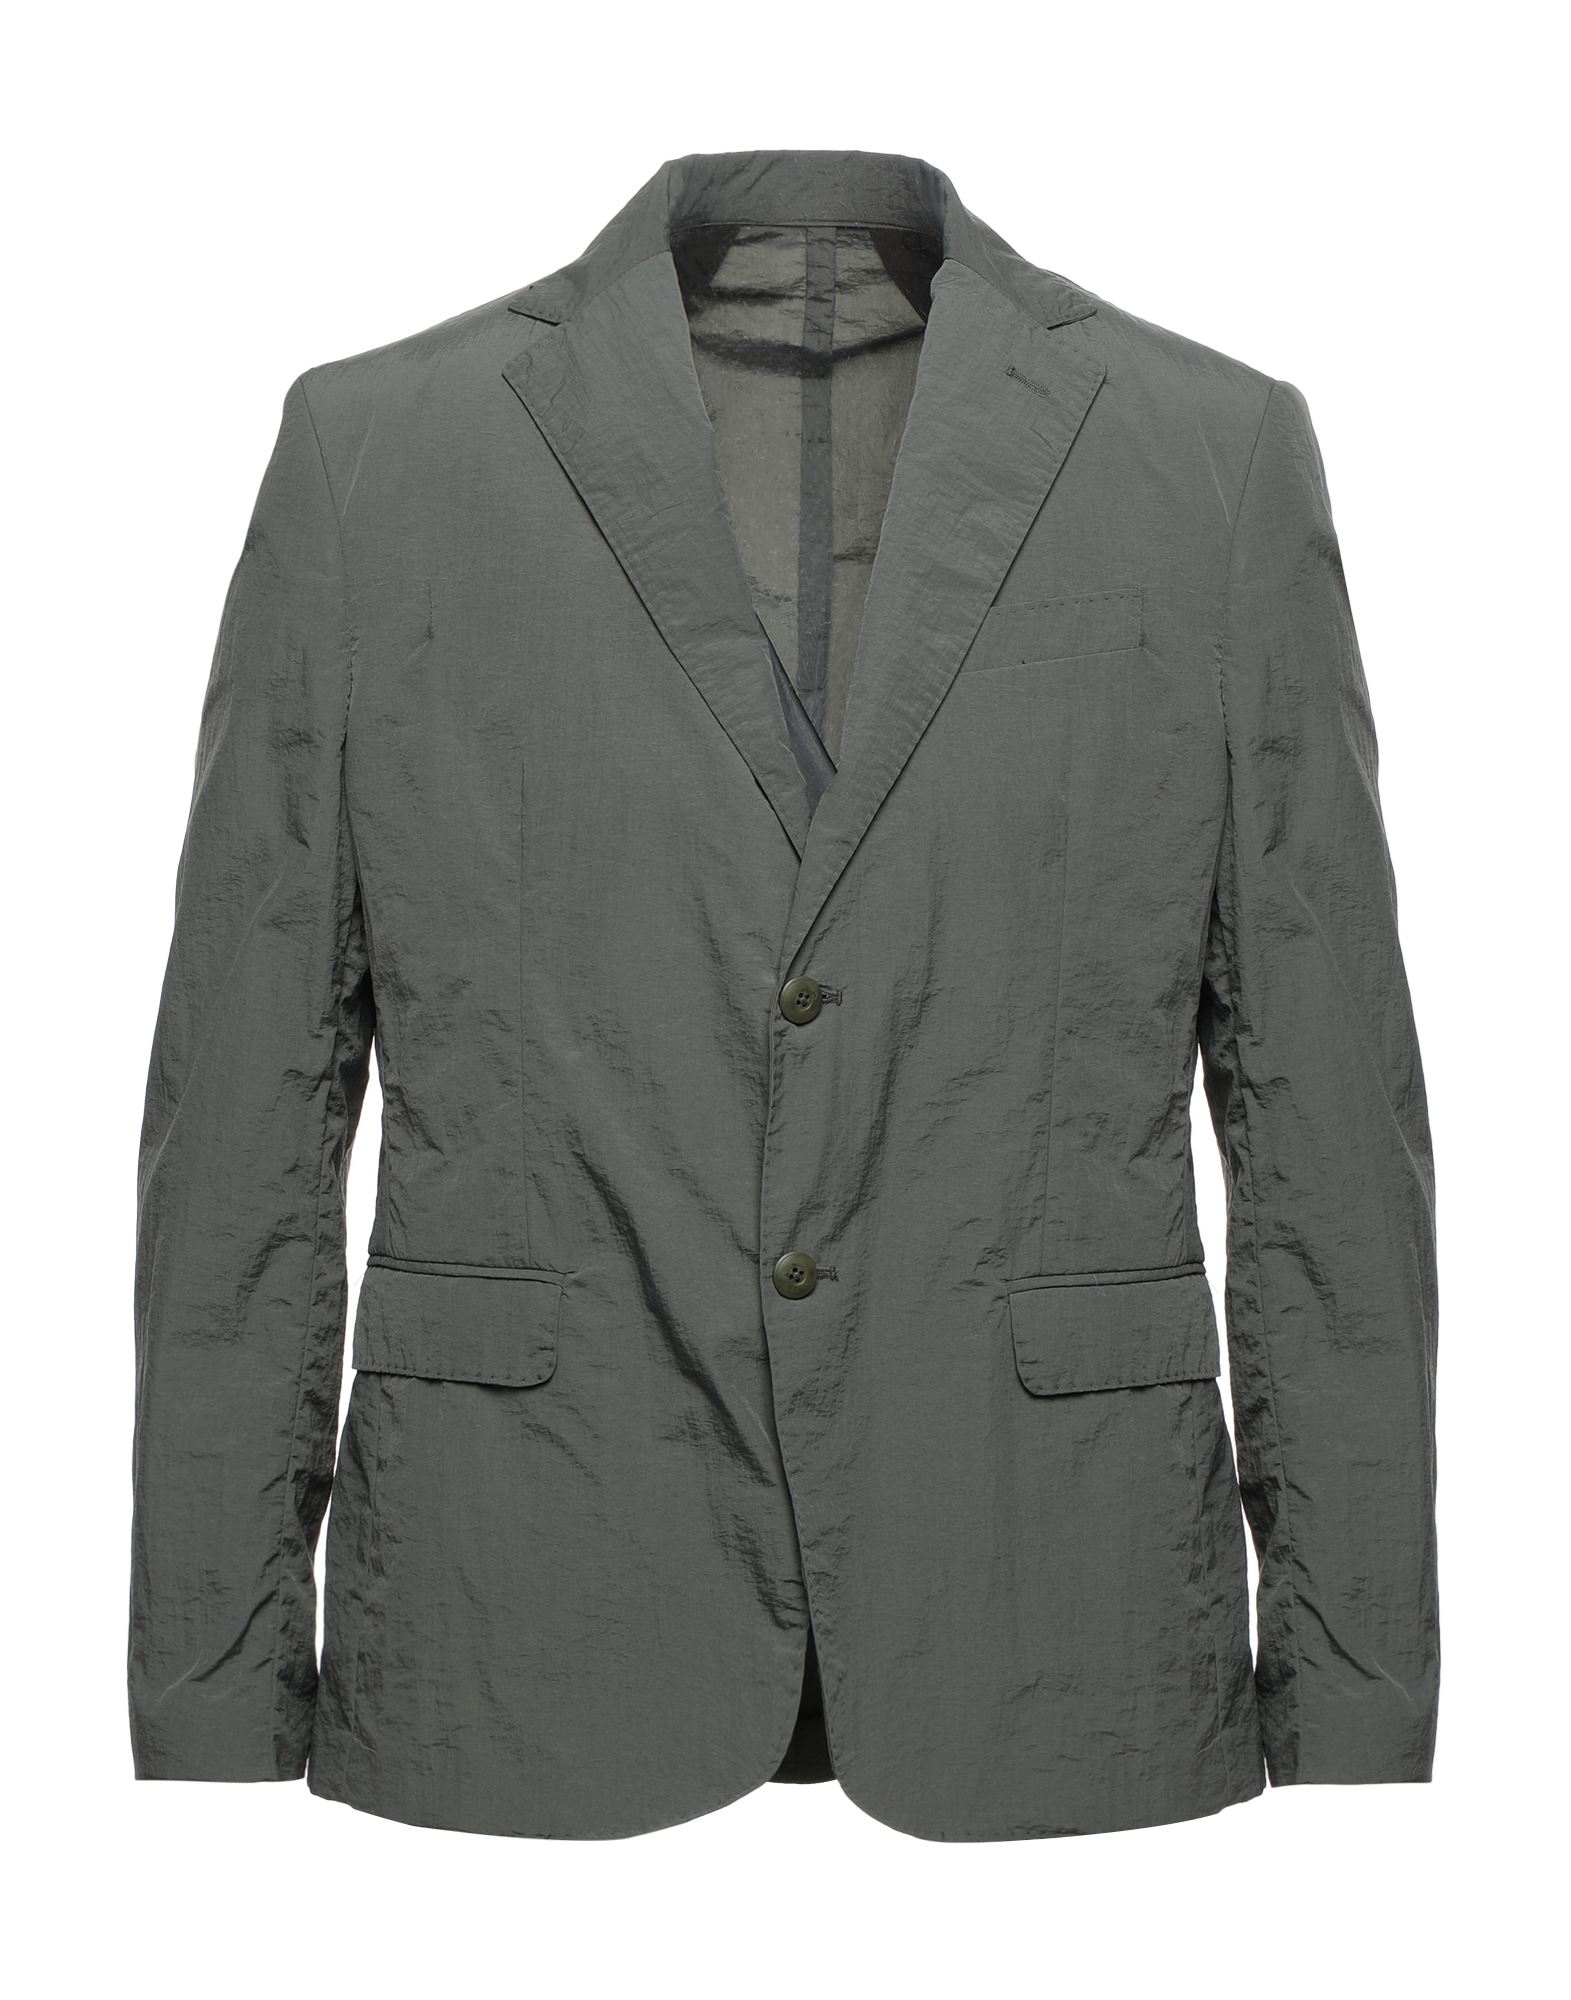 MARCIANO Suit jackets